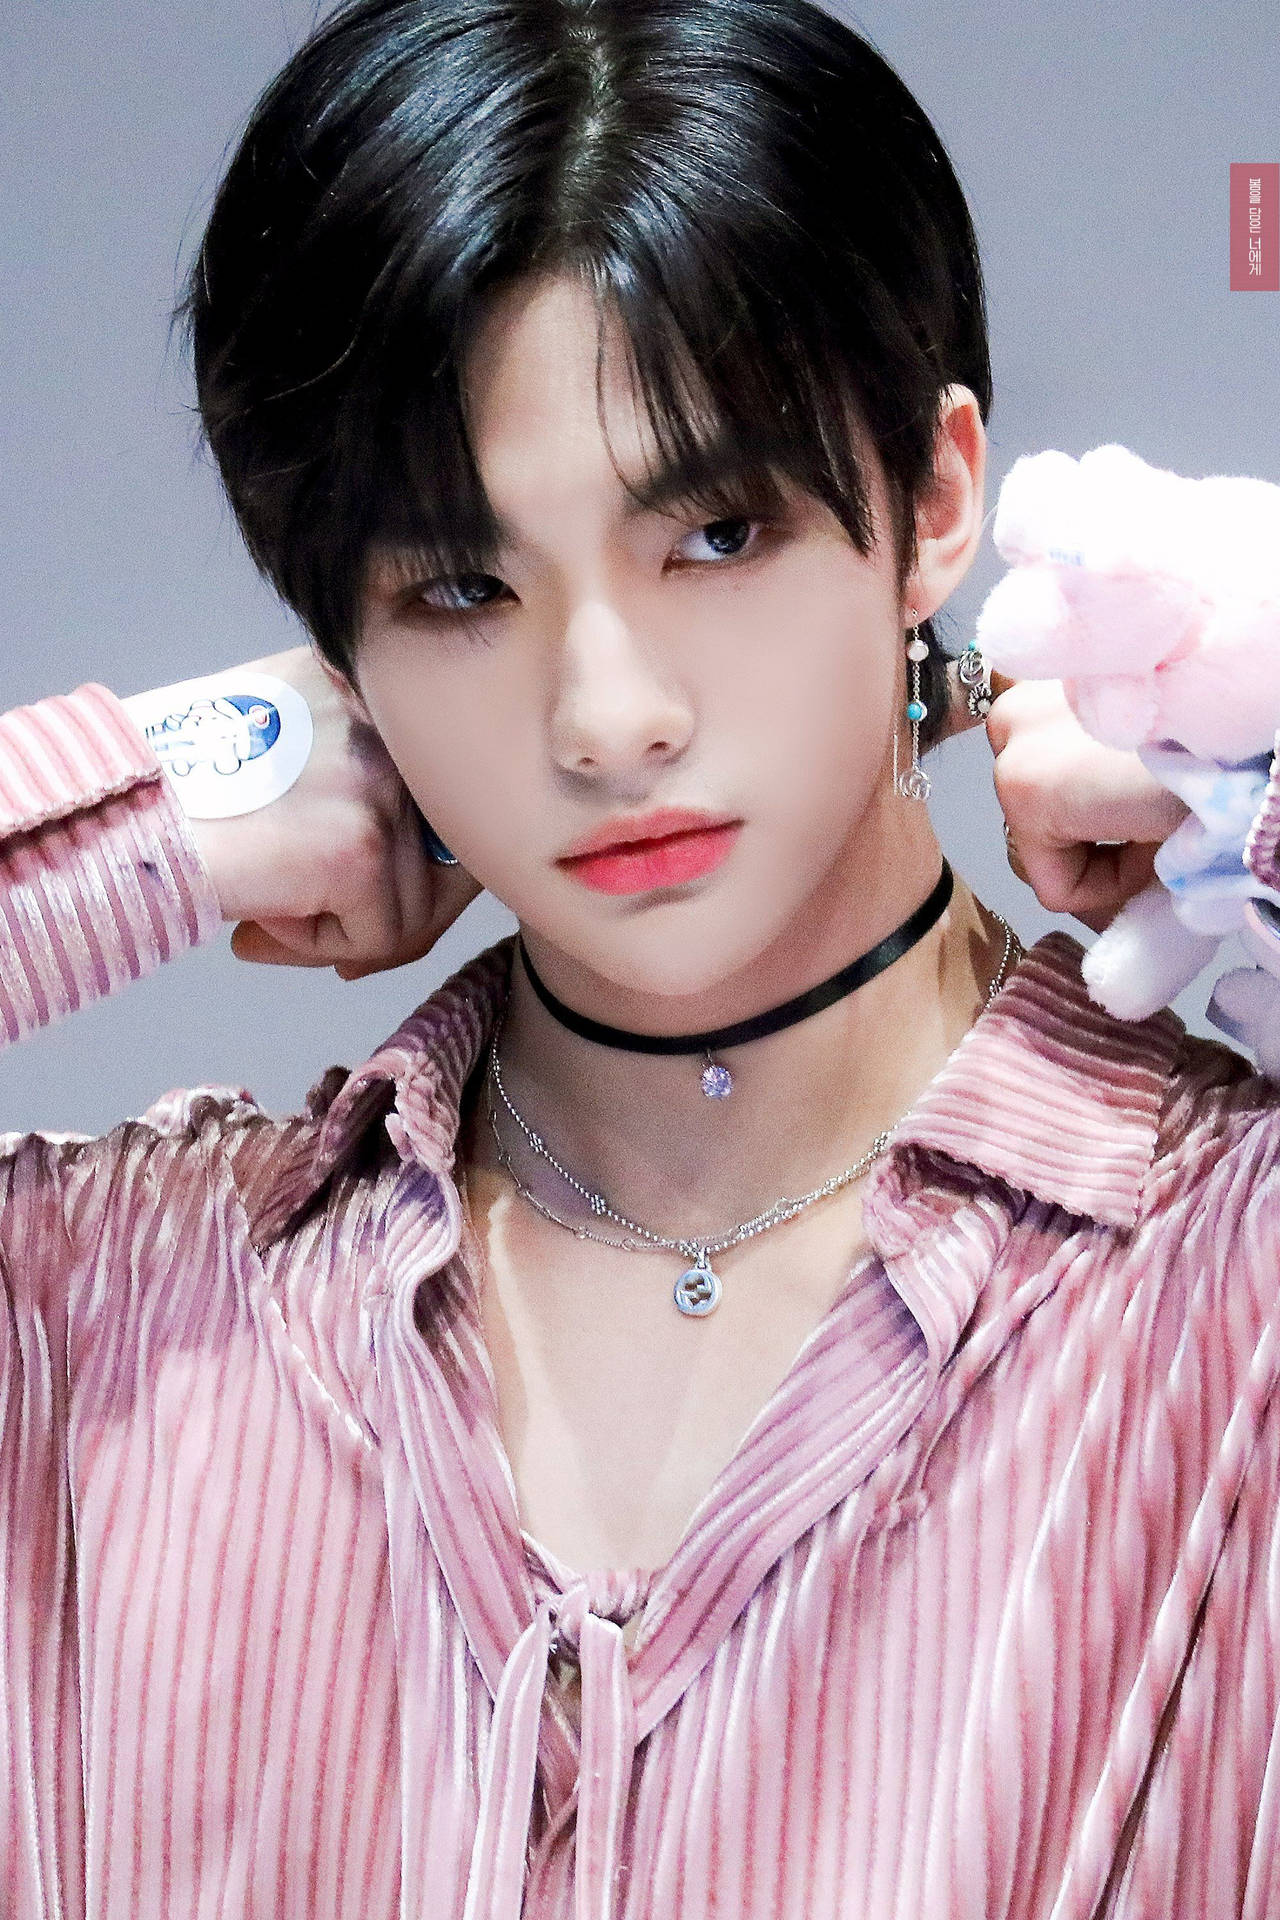 Hyunjin of Stray Kids marks the start of an exciting career! Wallpaper